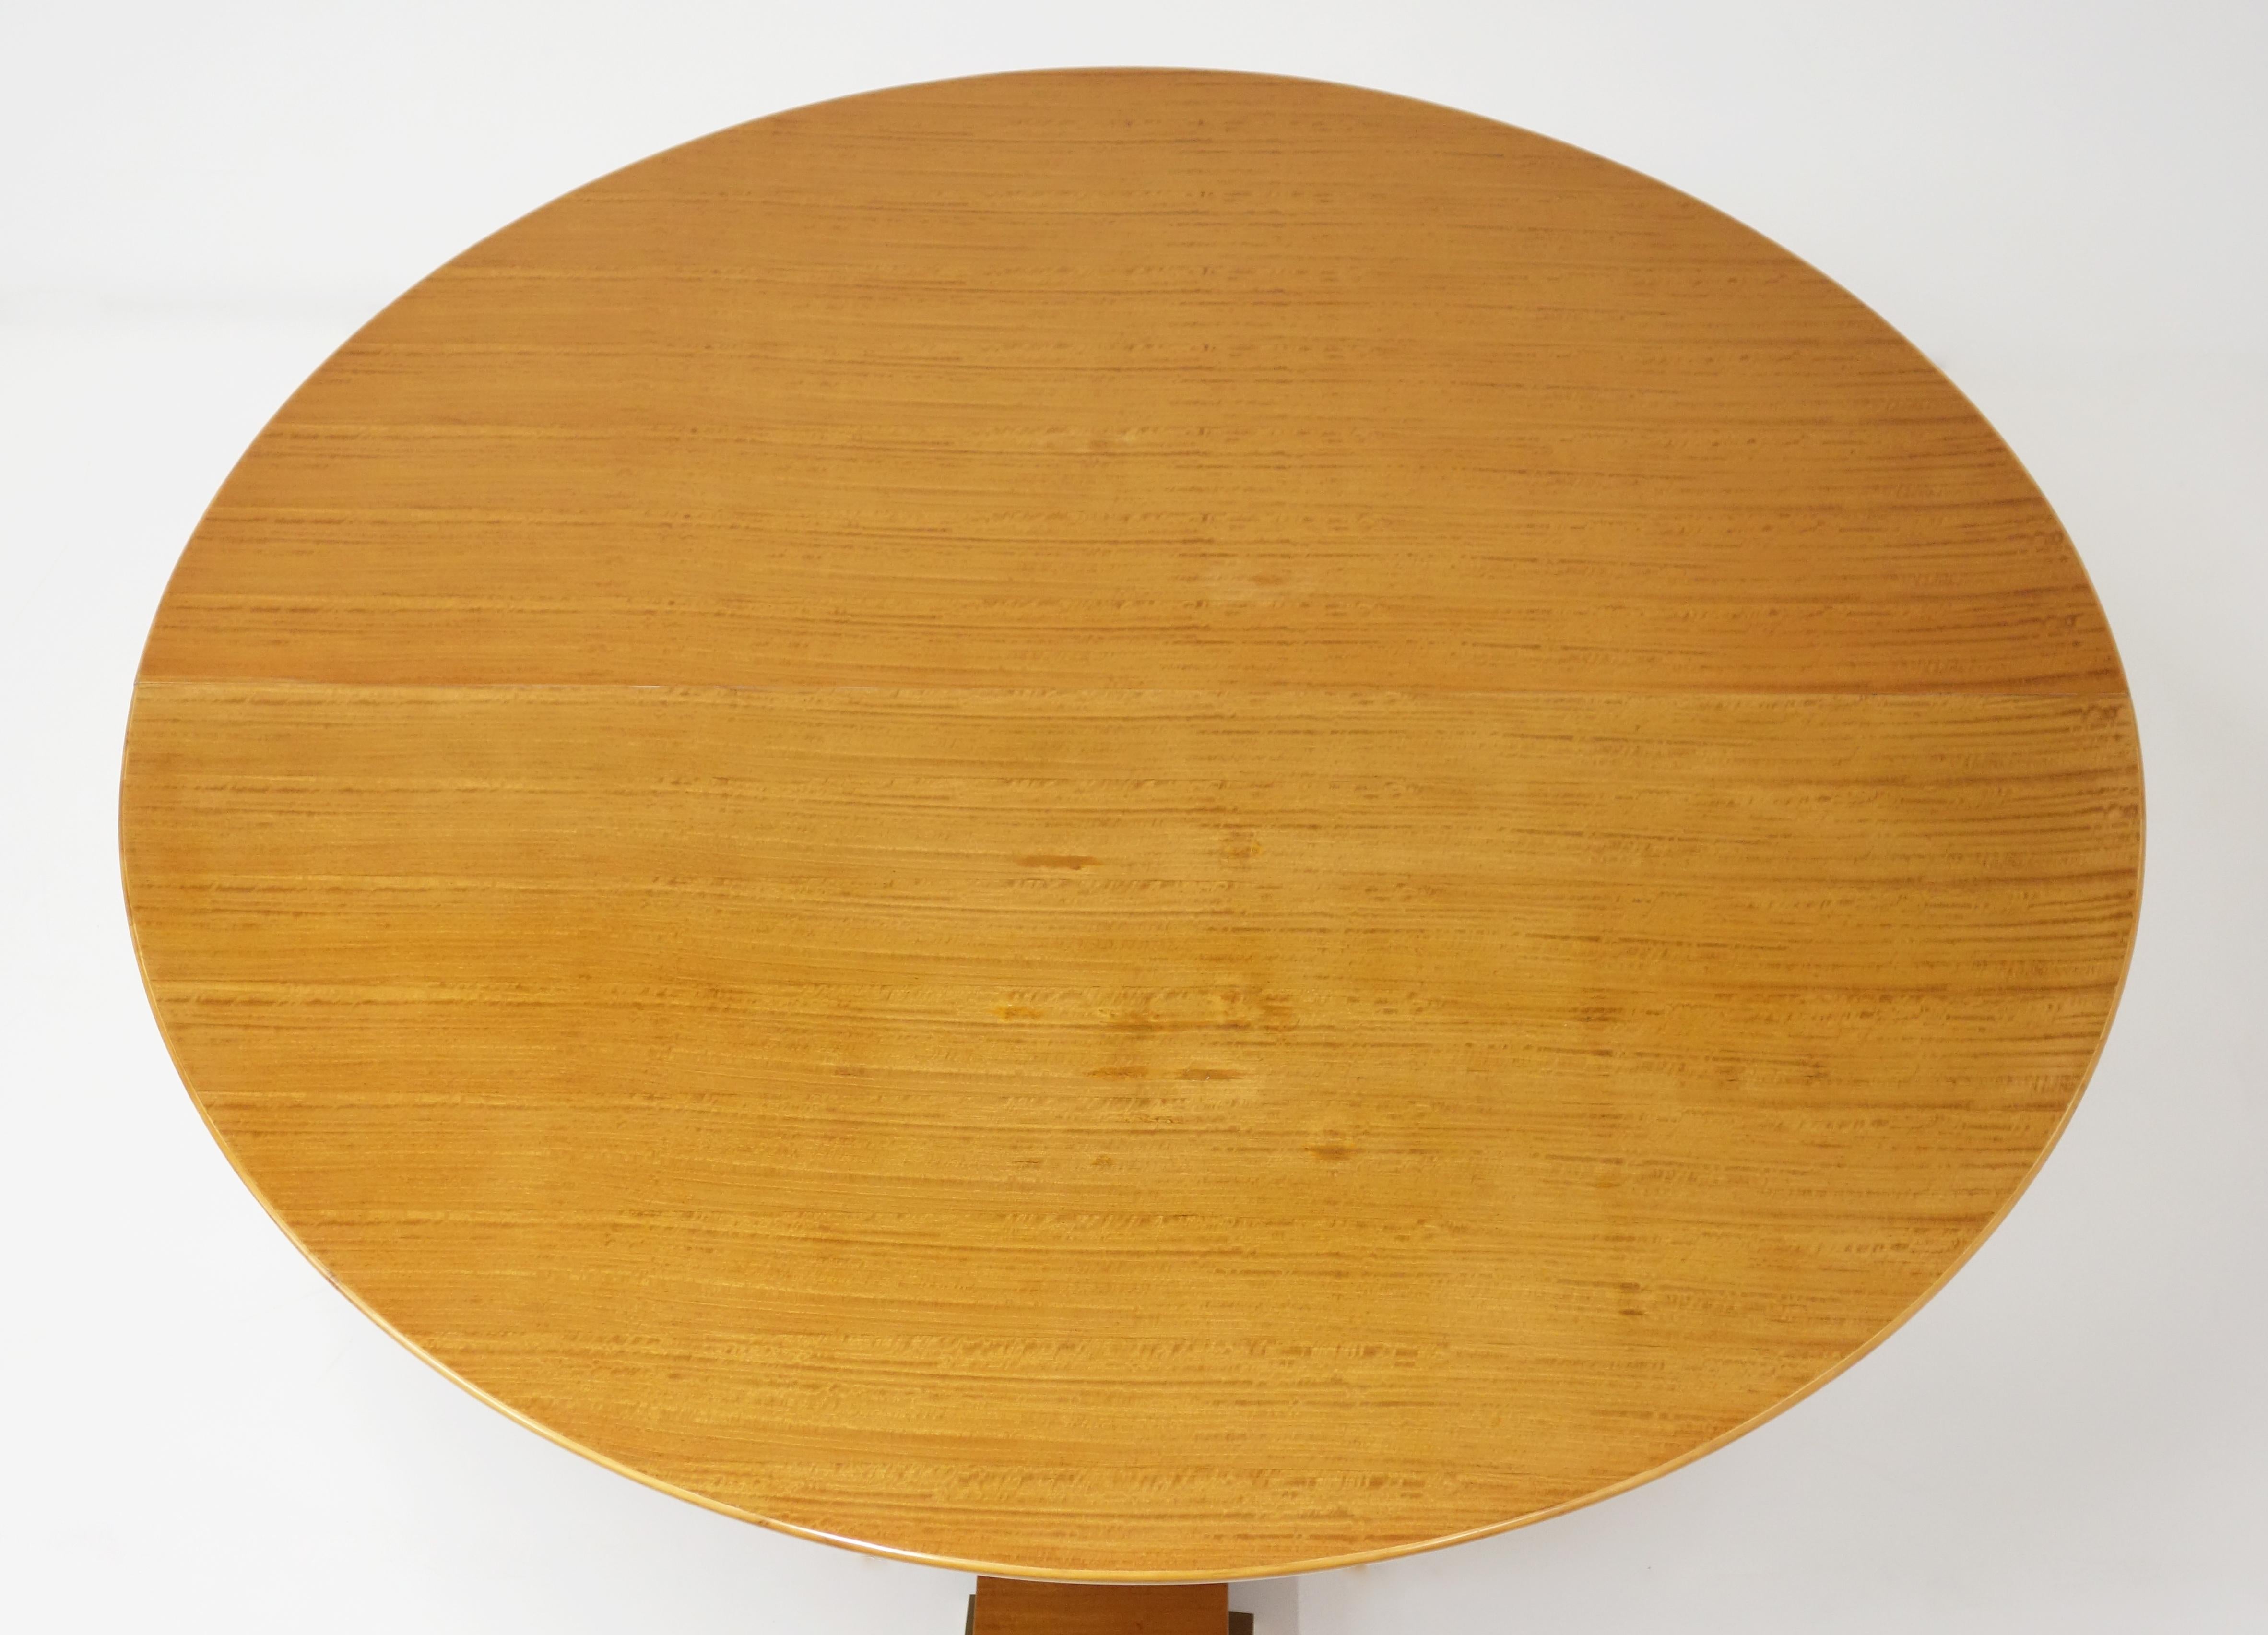 Varnished Lemon-tree circular table by Jean Royère, circa 1950.
The wing-shaped circular top stands on a central foot composed of three spindle-shaped columns. Each column is set with a circular gilt bronze ring.
The table stands on a base set off